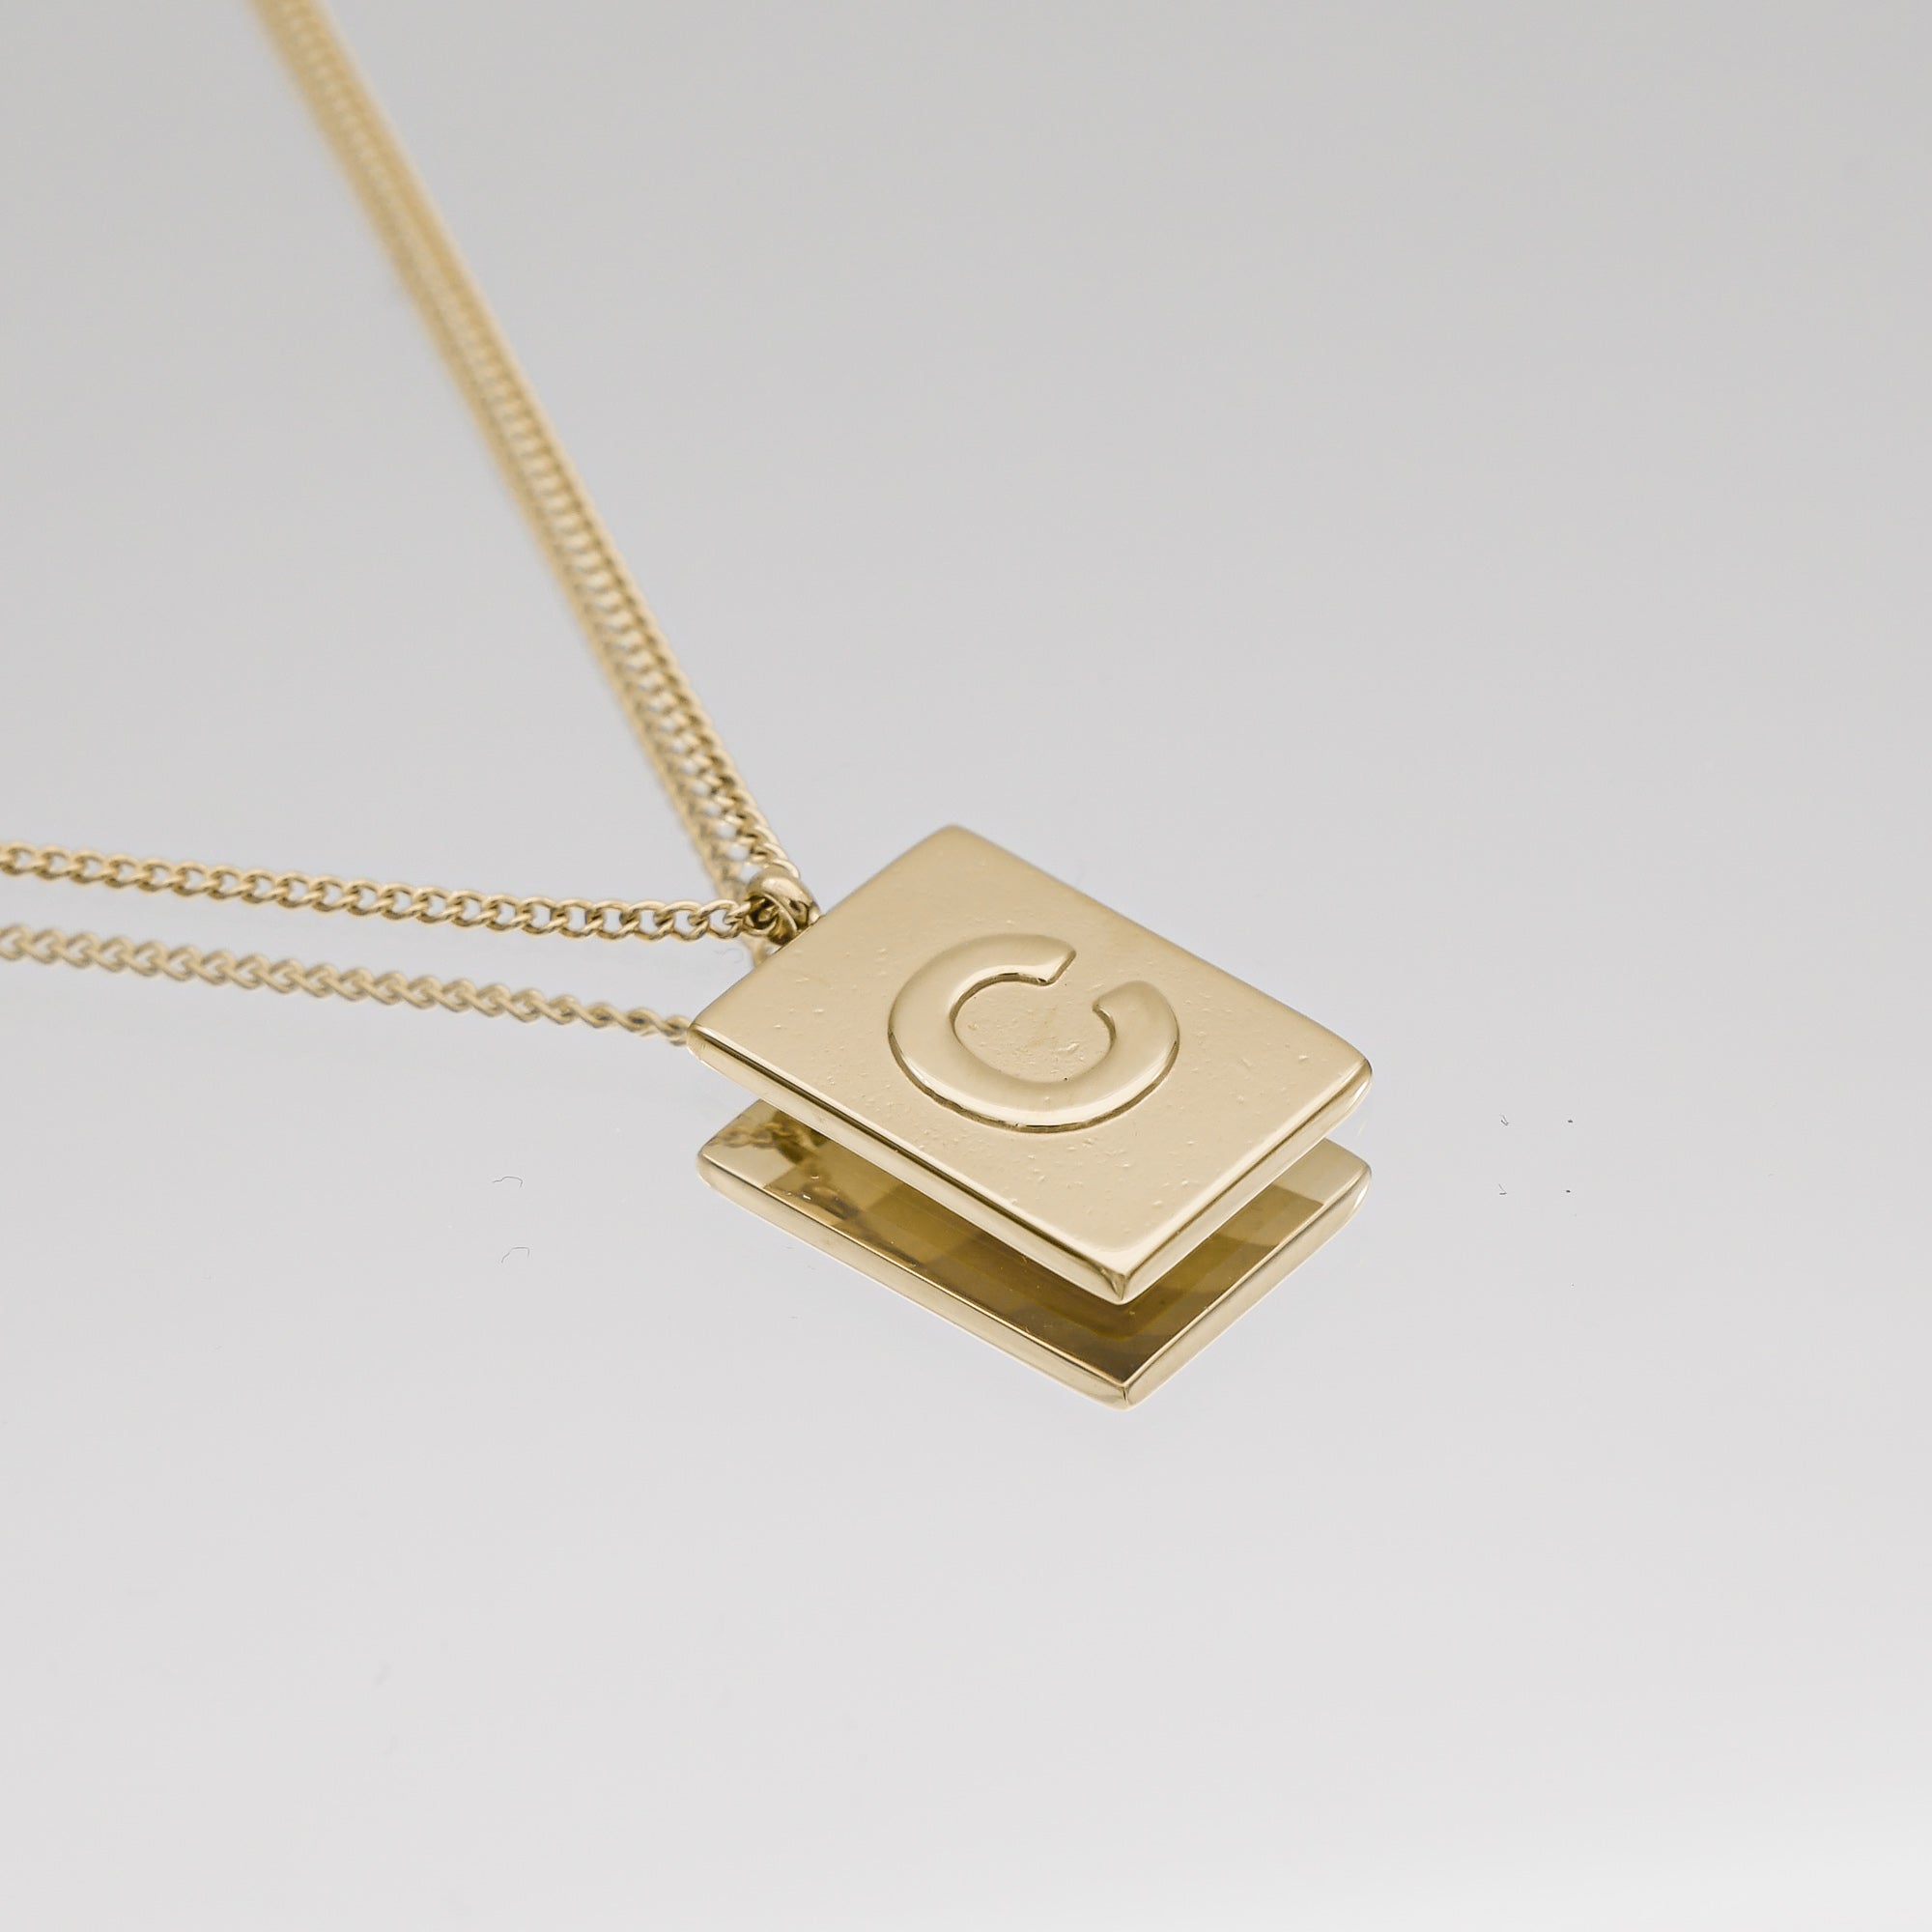 Athena custom initial Gold pendant Necklace, letter C by PRYA